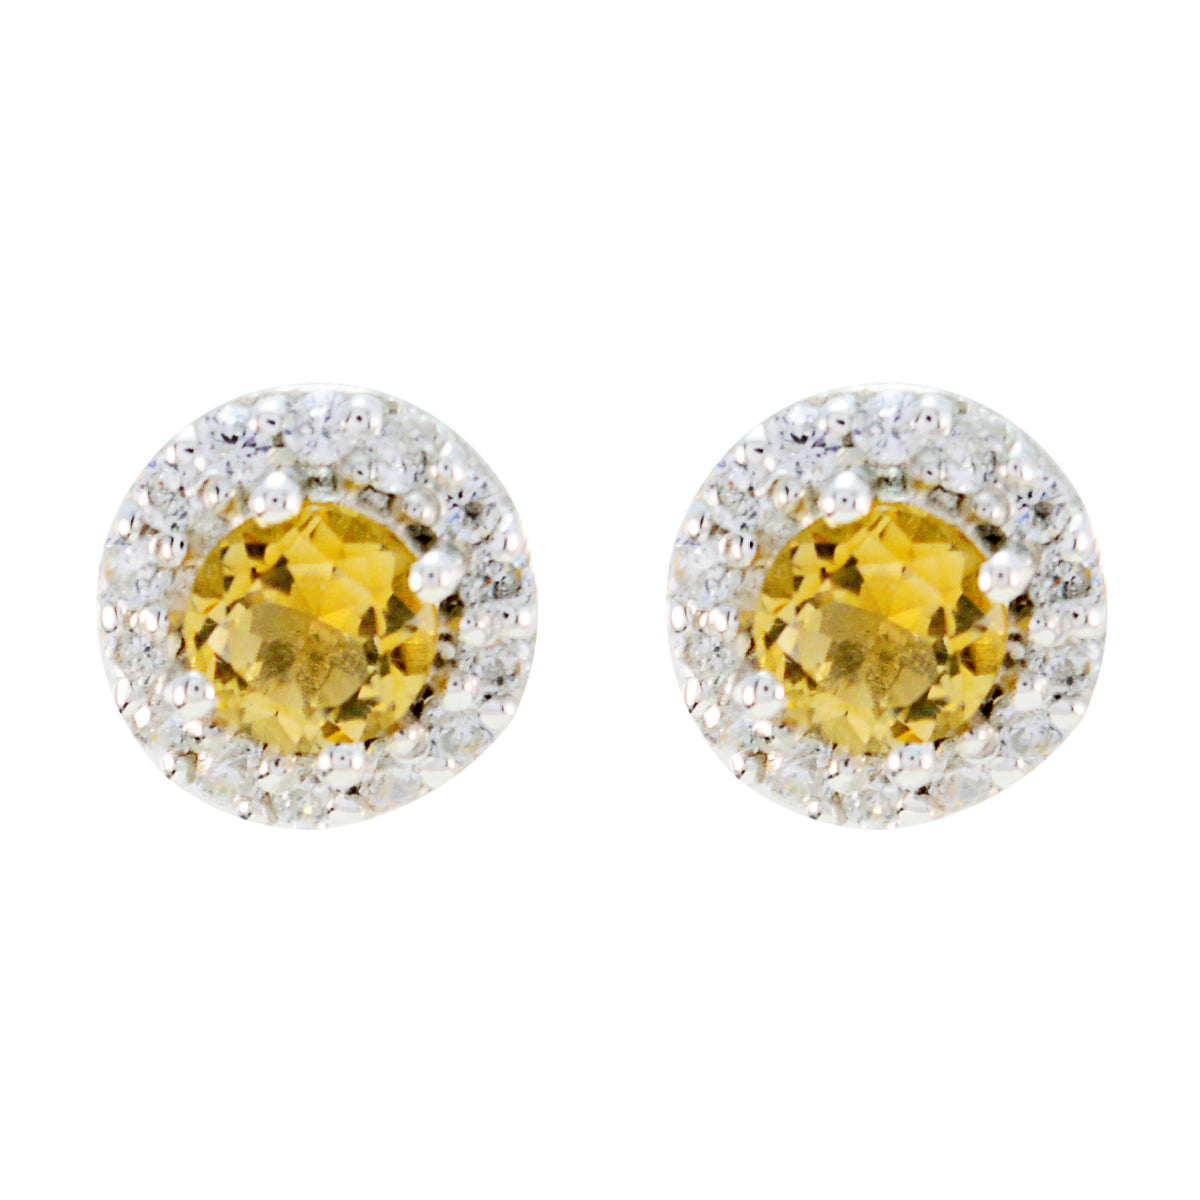 Riyo Genuine Gems round Faceted Yellow Citrine Silver Earrings college student gift